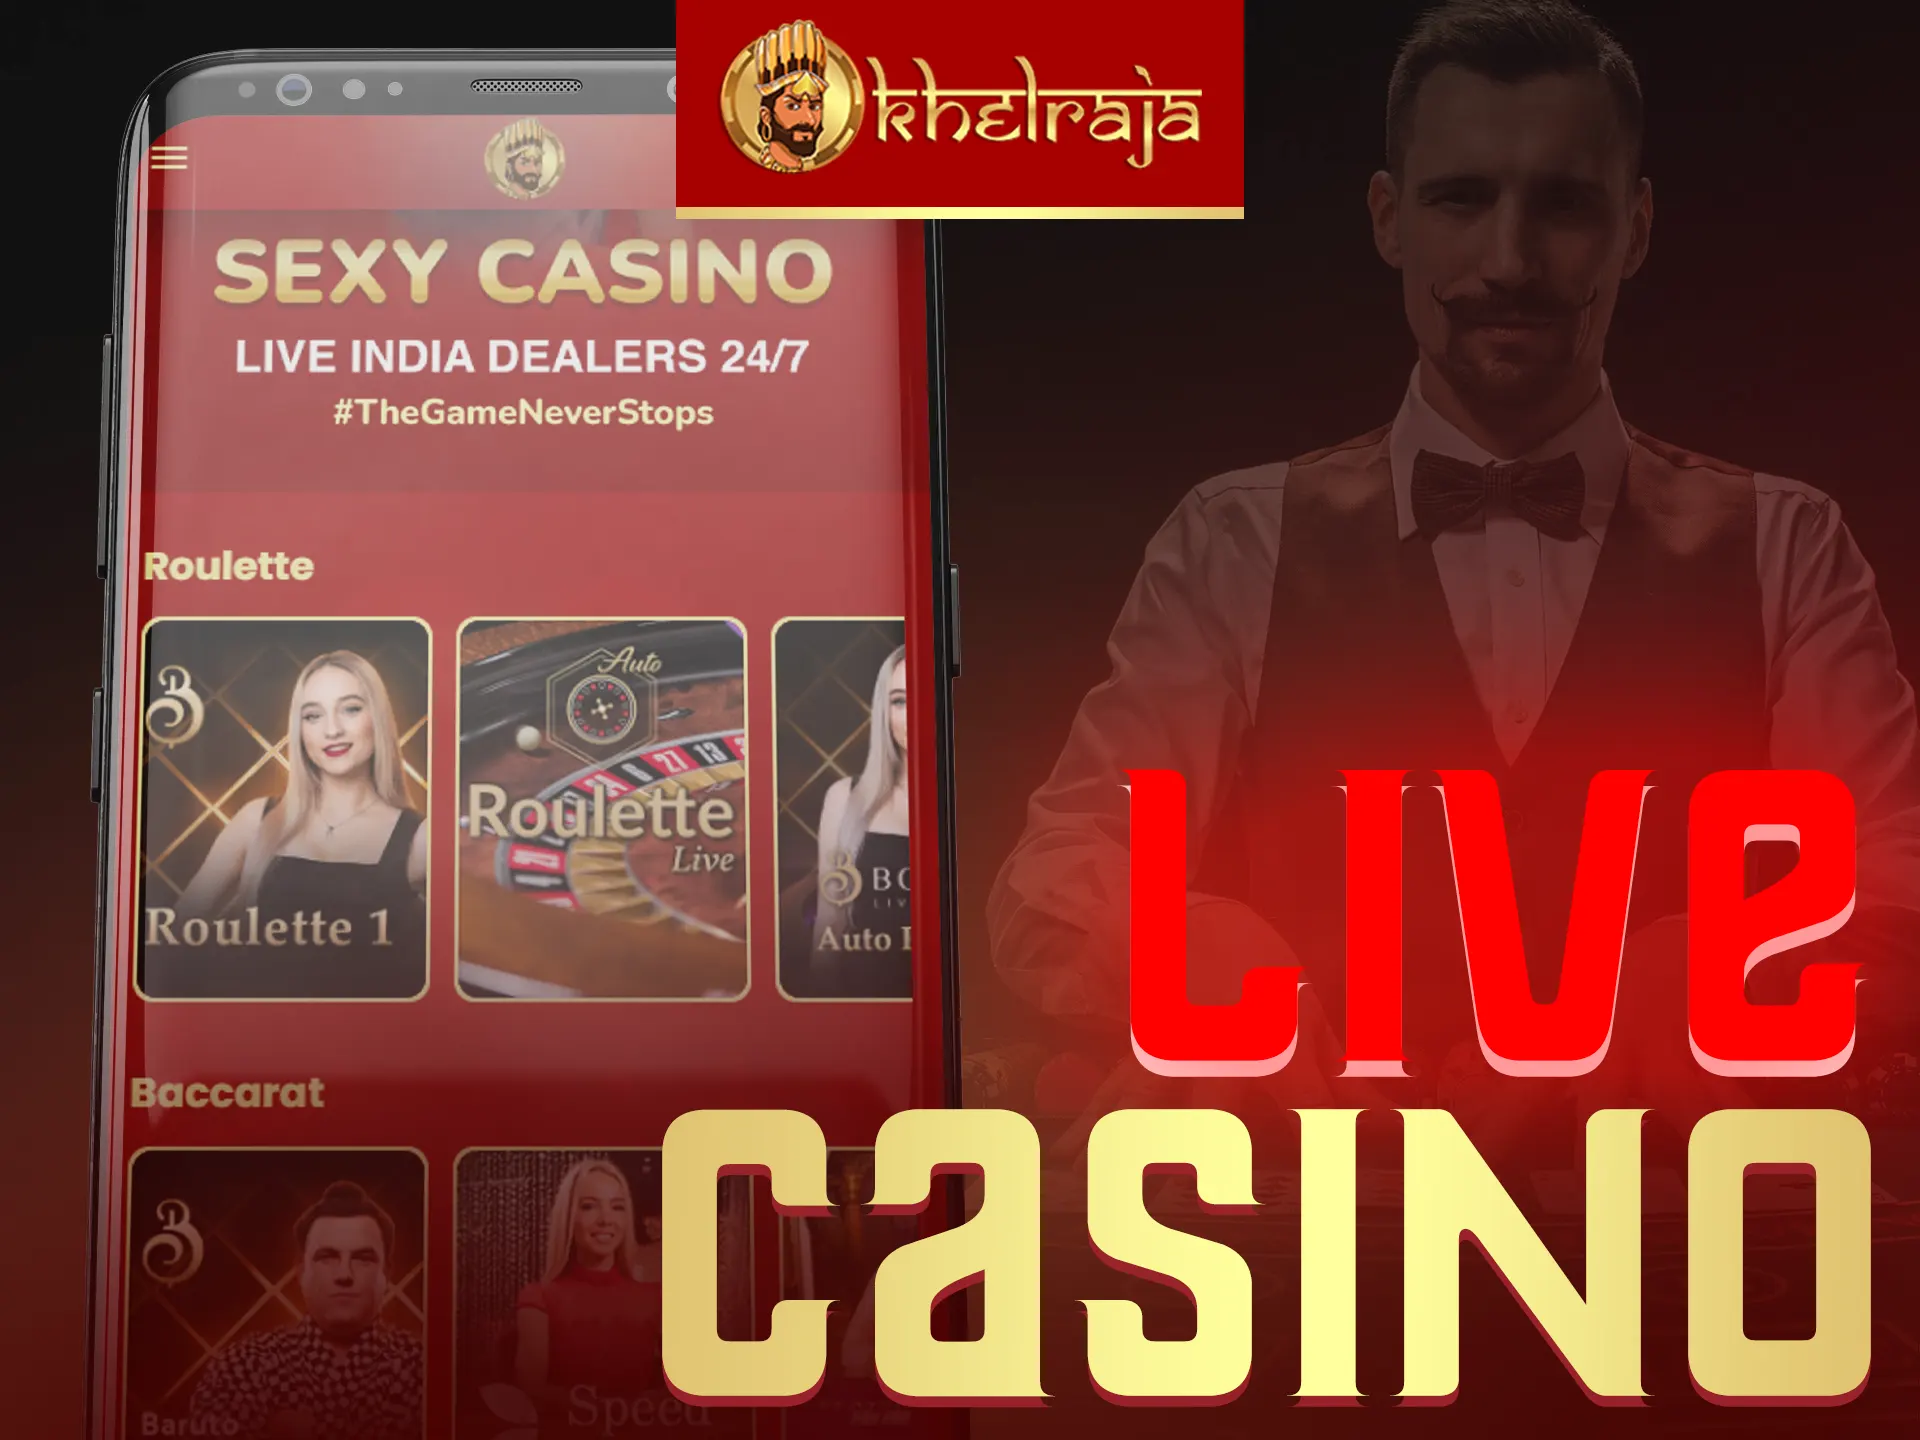 Khelraja's app features live casino games with real dealers.